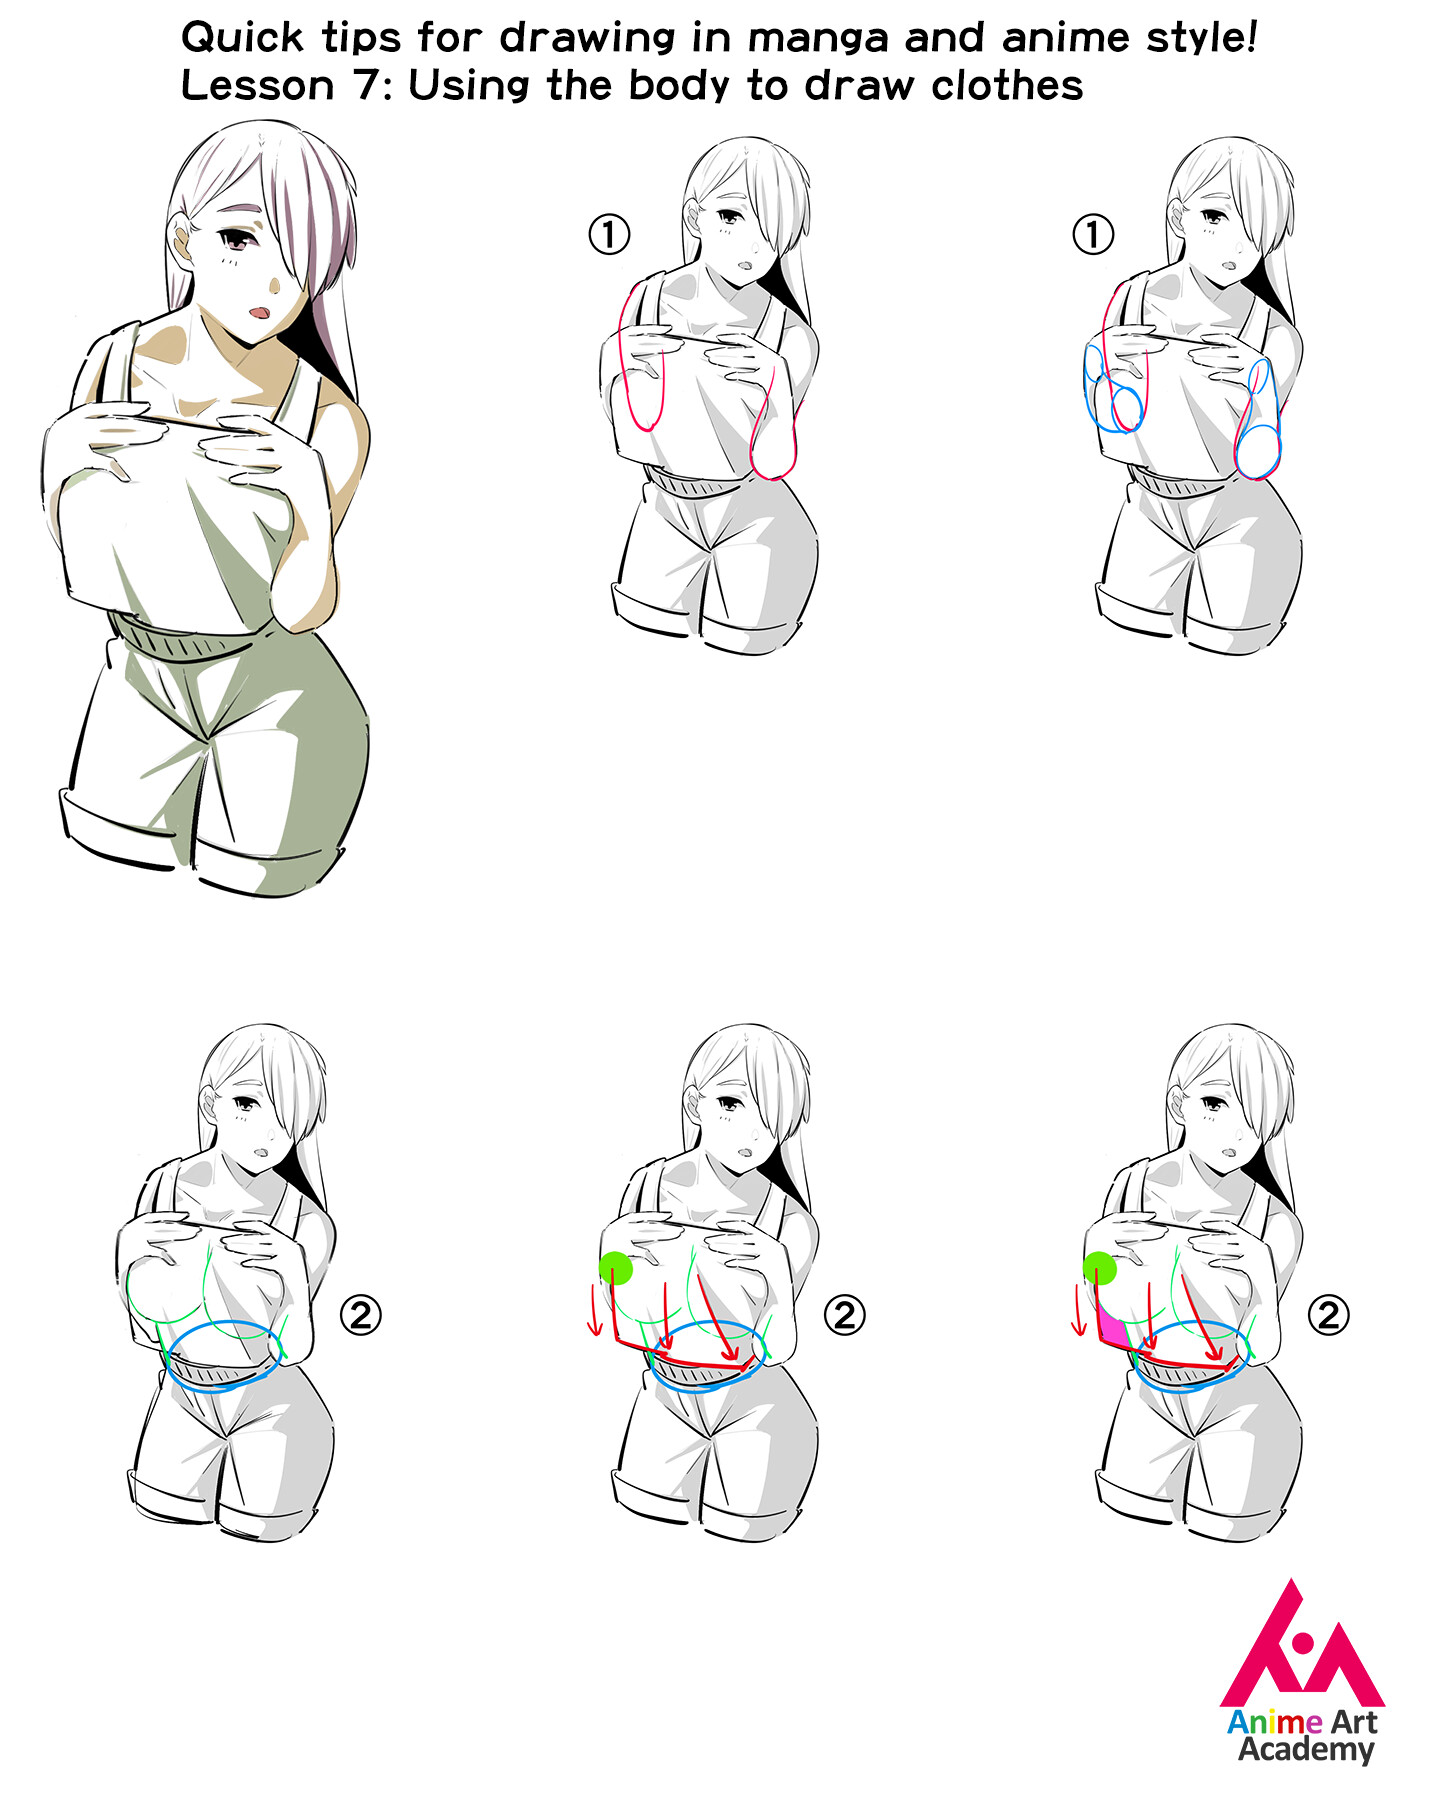 ArtStation - Quick tips for drawing in manga and anime style! Using the  body to draw clothes